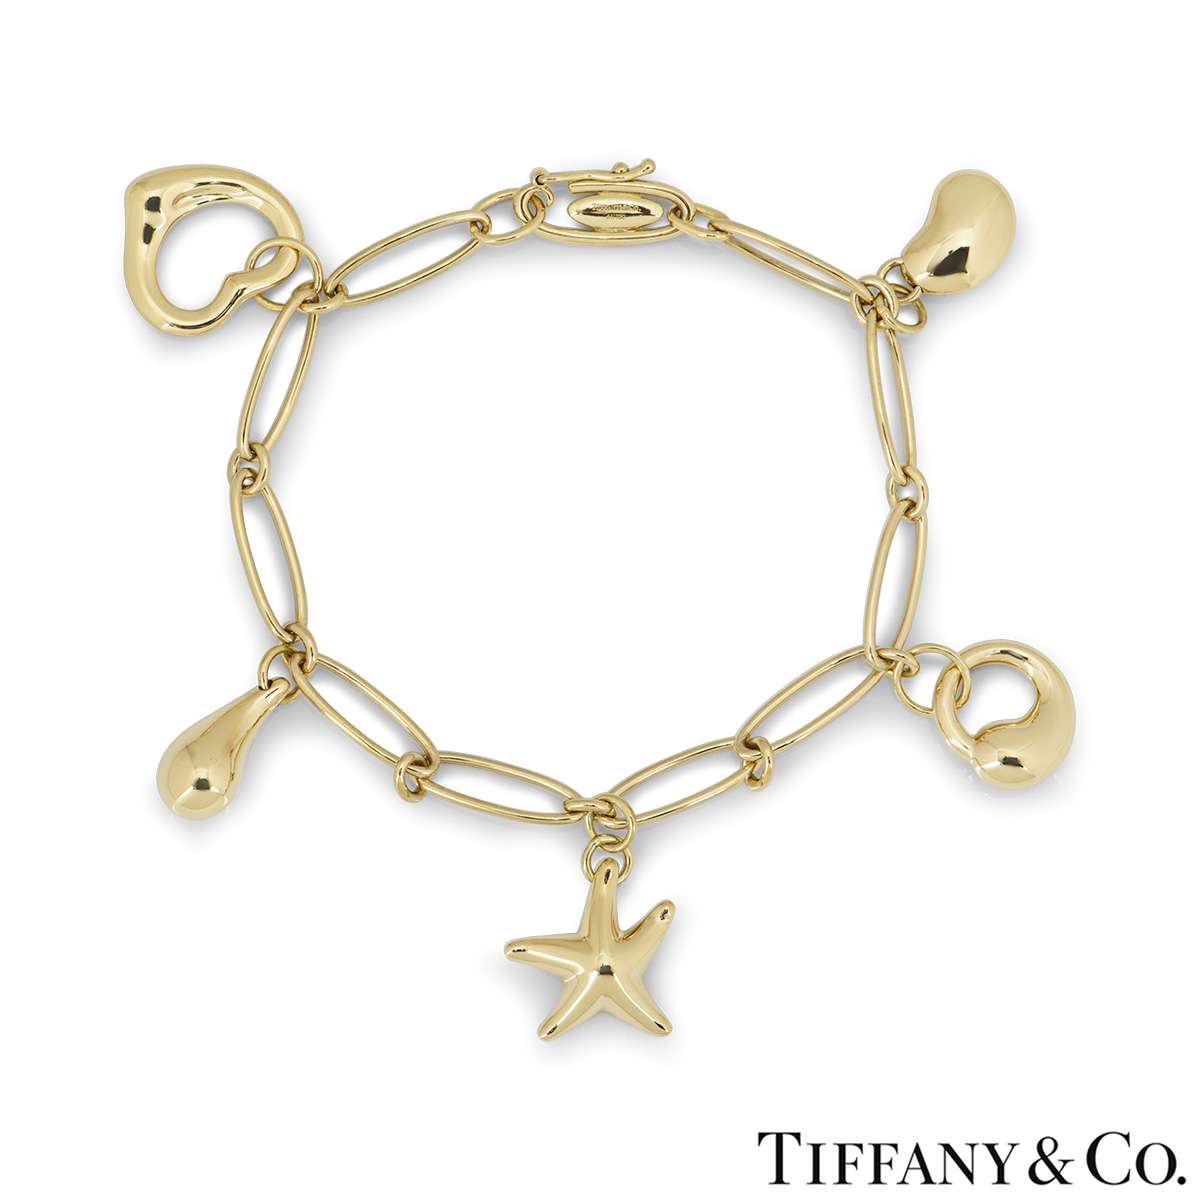 Tiffany  Co Charm Bracelet 18K Yellow Gold Cable Car Eiffel Tower  Paloma Picasso Heart  Estates Consignments Tiffany  Co Charm Bracelet  18K Yellow Gold Cable Car Eiffel Tower Paloma Picasso